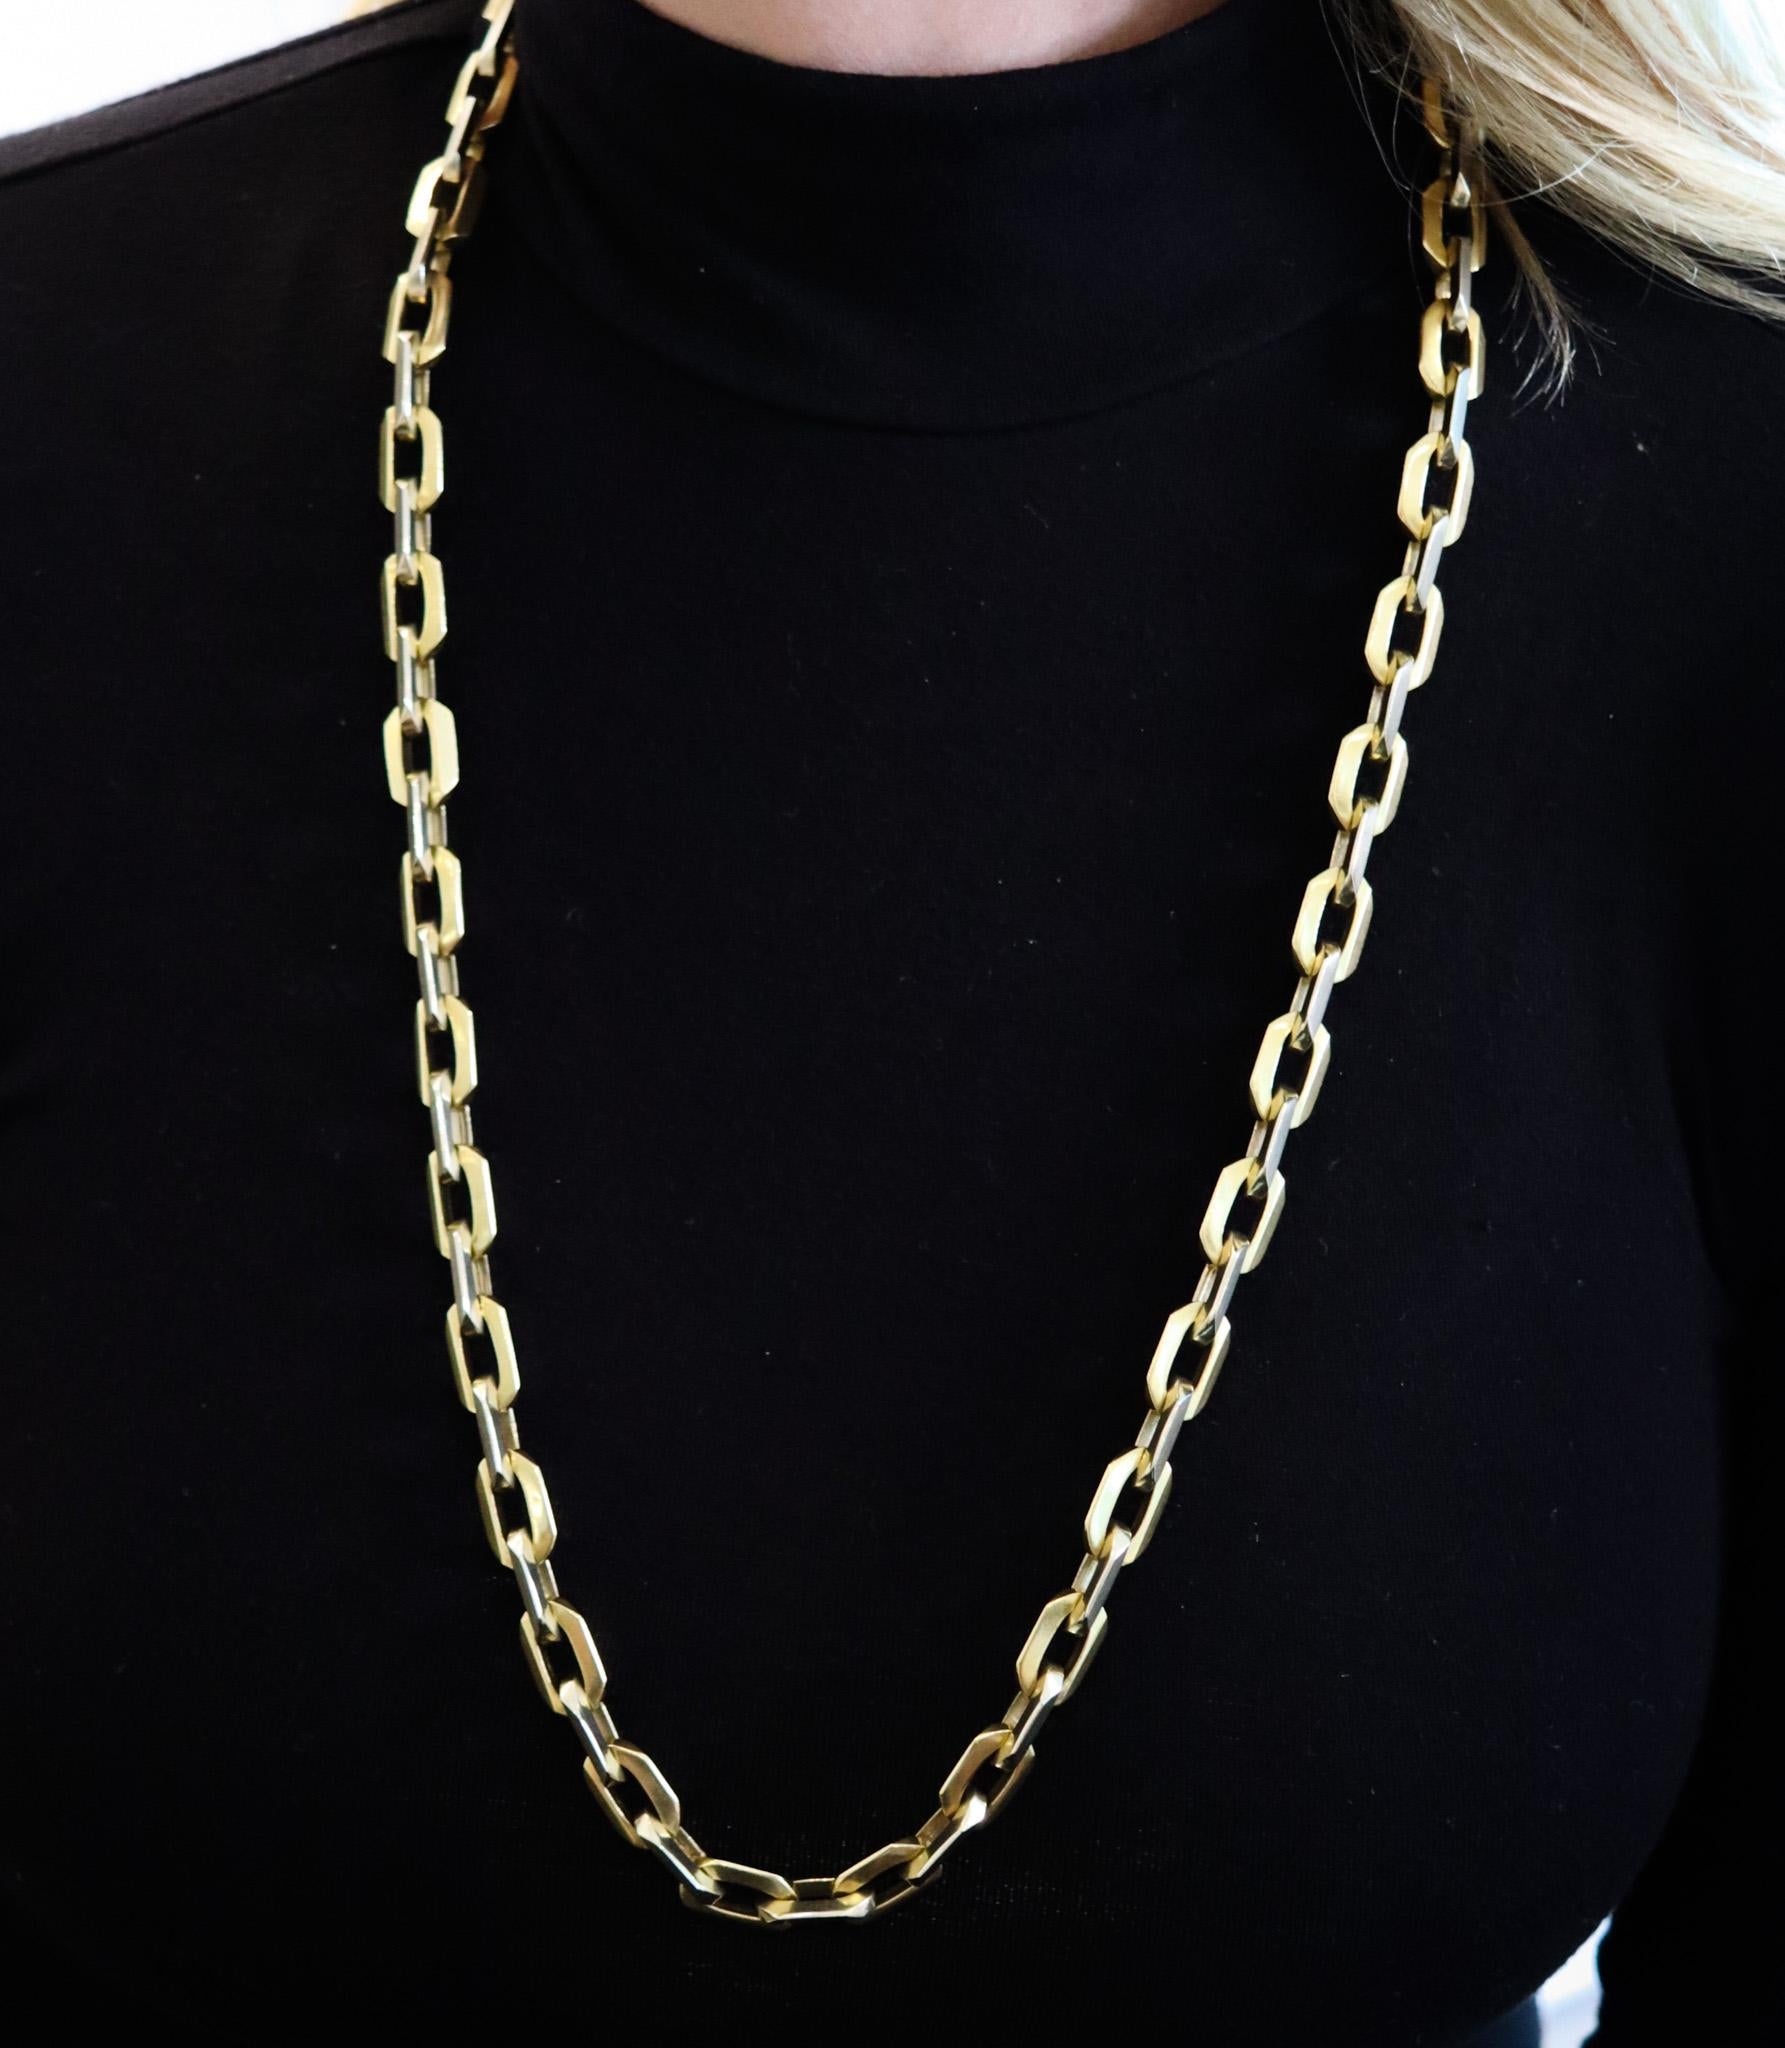 Gübelin 1970 Zurich Long Sautoir Necklace Chain in Two Tones of 18kt Gold 3